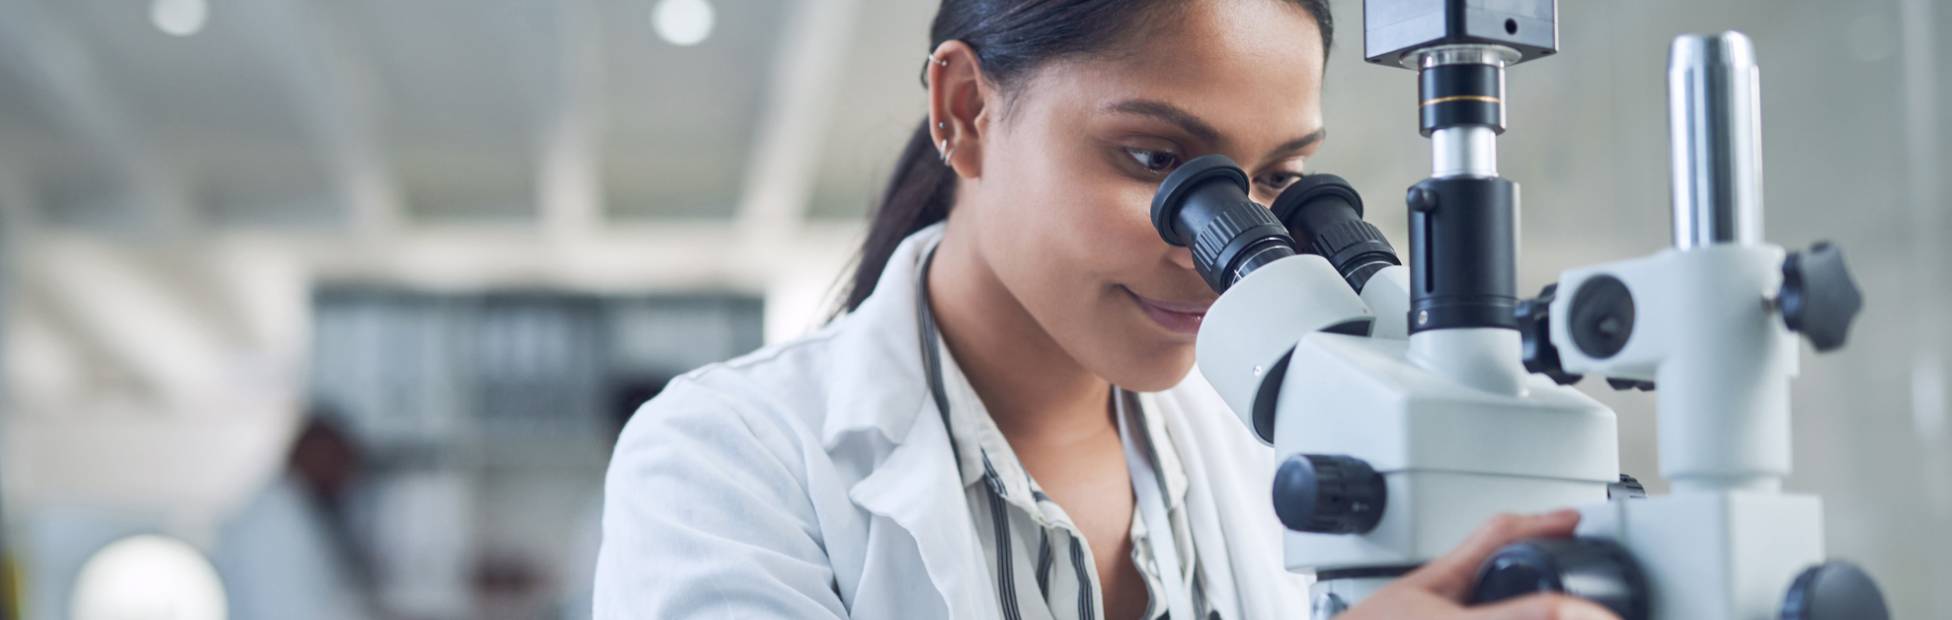 An image of a female pathologist working at the lab